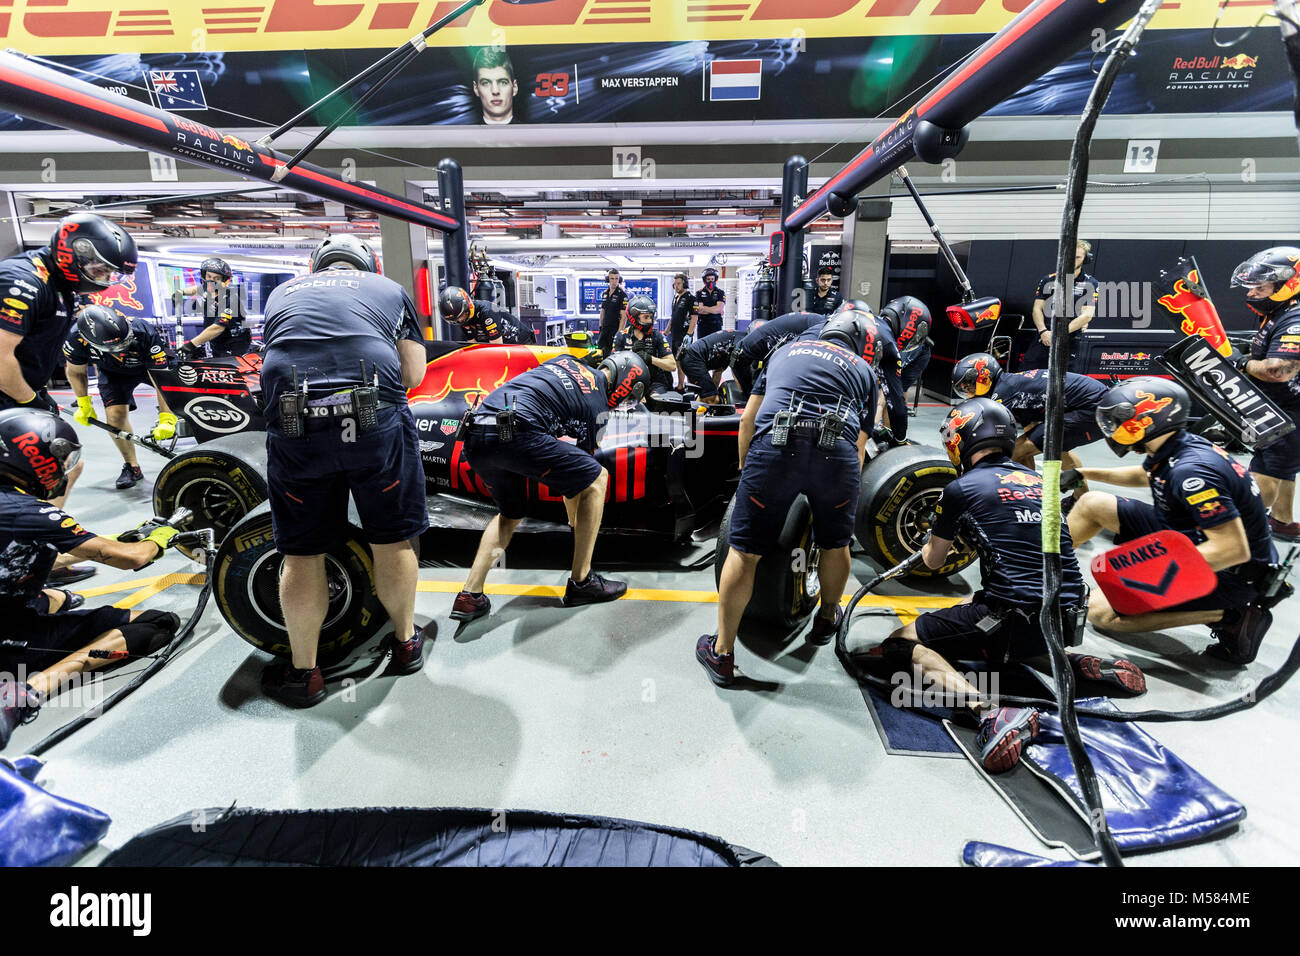 Formula One F1 Red Bull pit crew working on the garage during pit stop Stock Photo